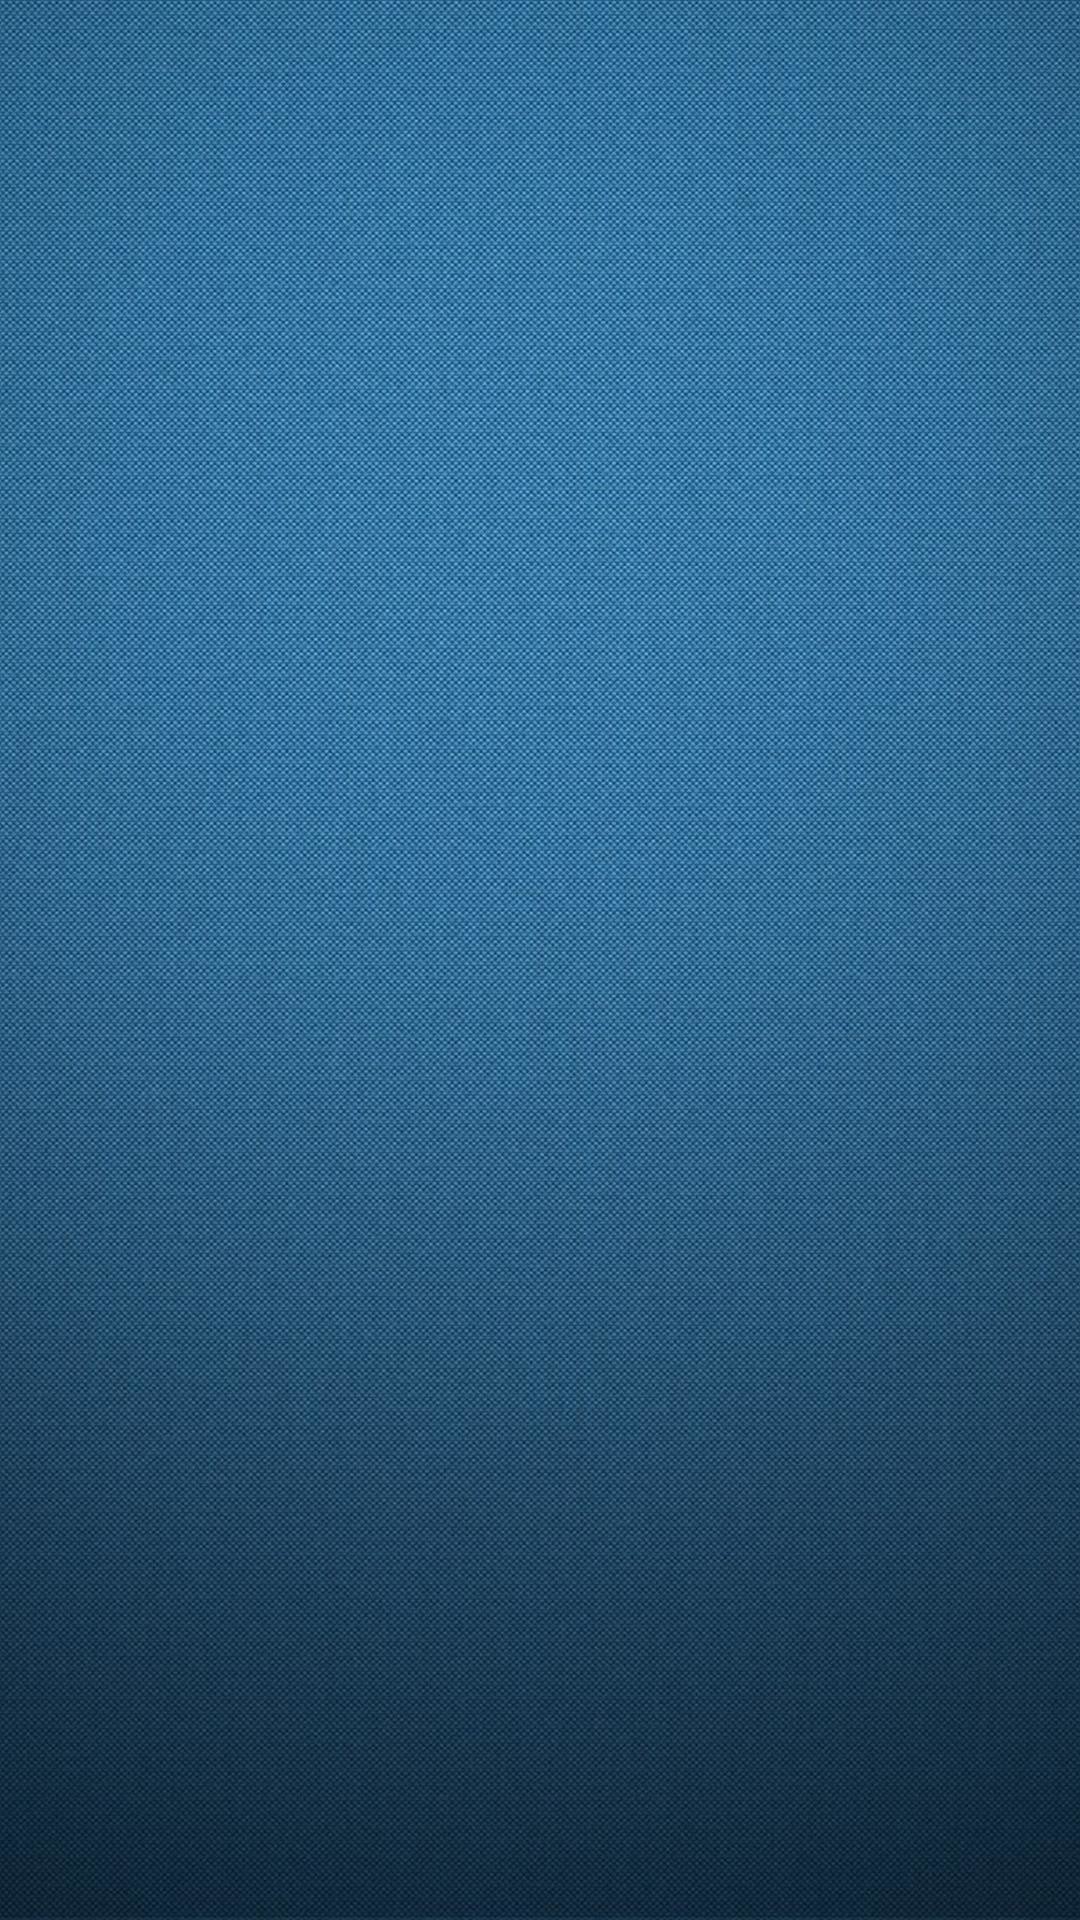 64+ Solid Color Wallpaper for iPhone